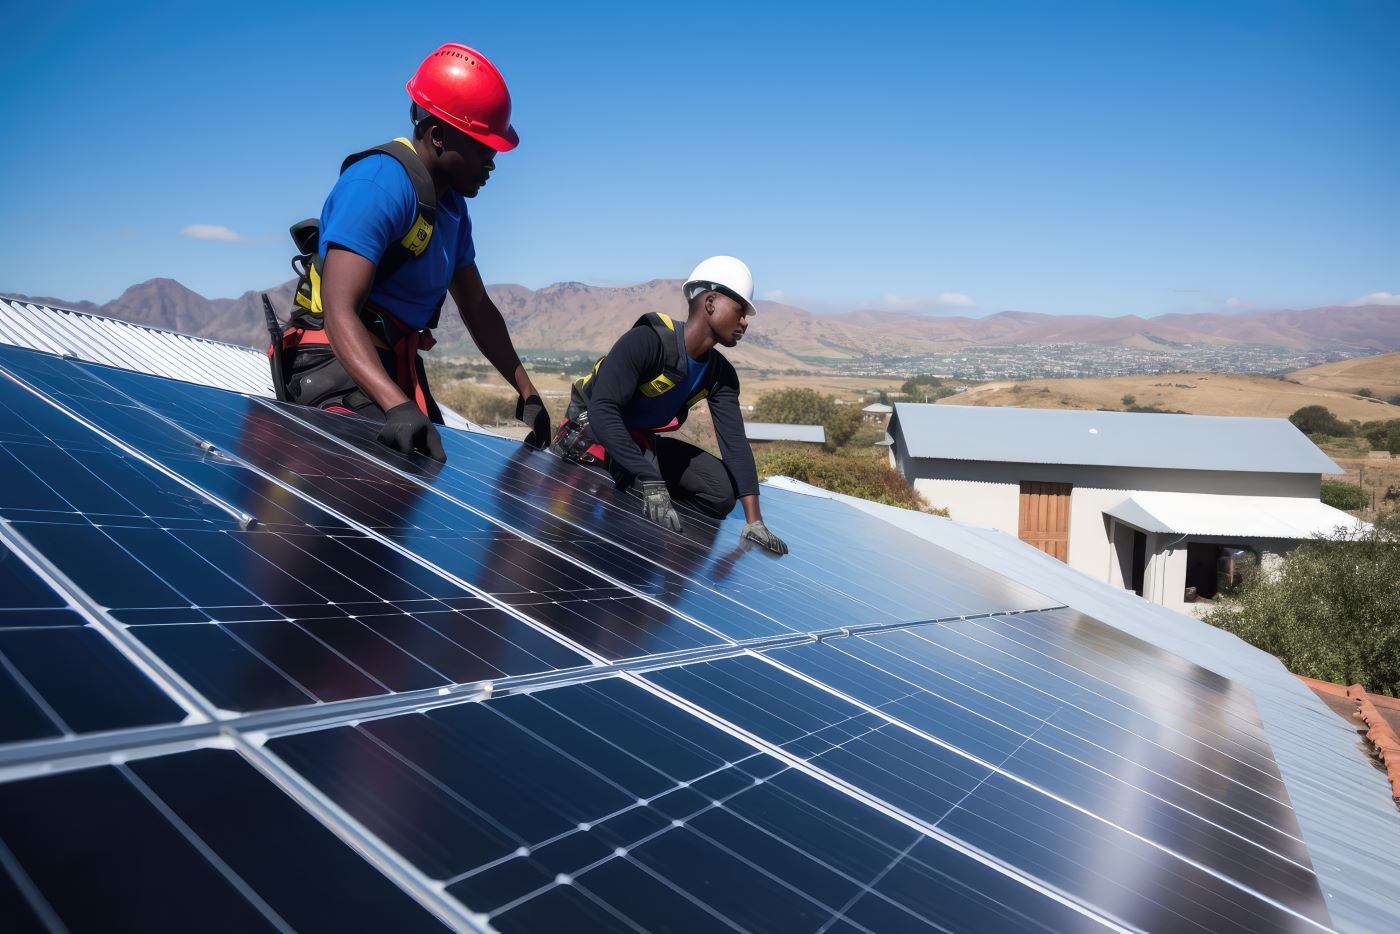 workers installing solar panels